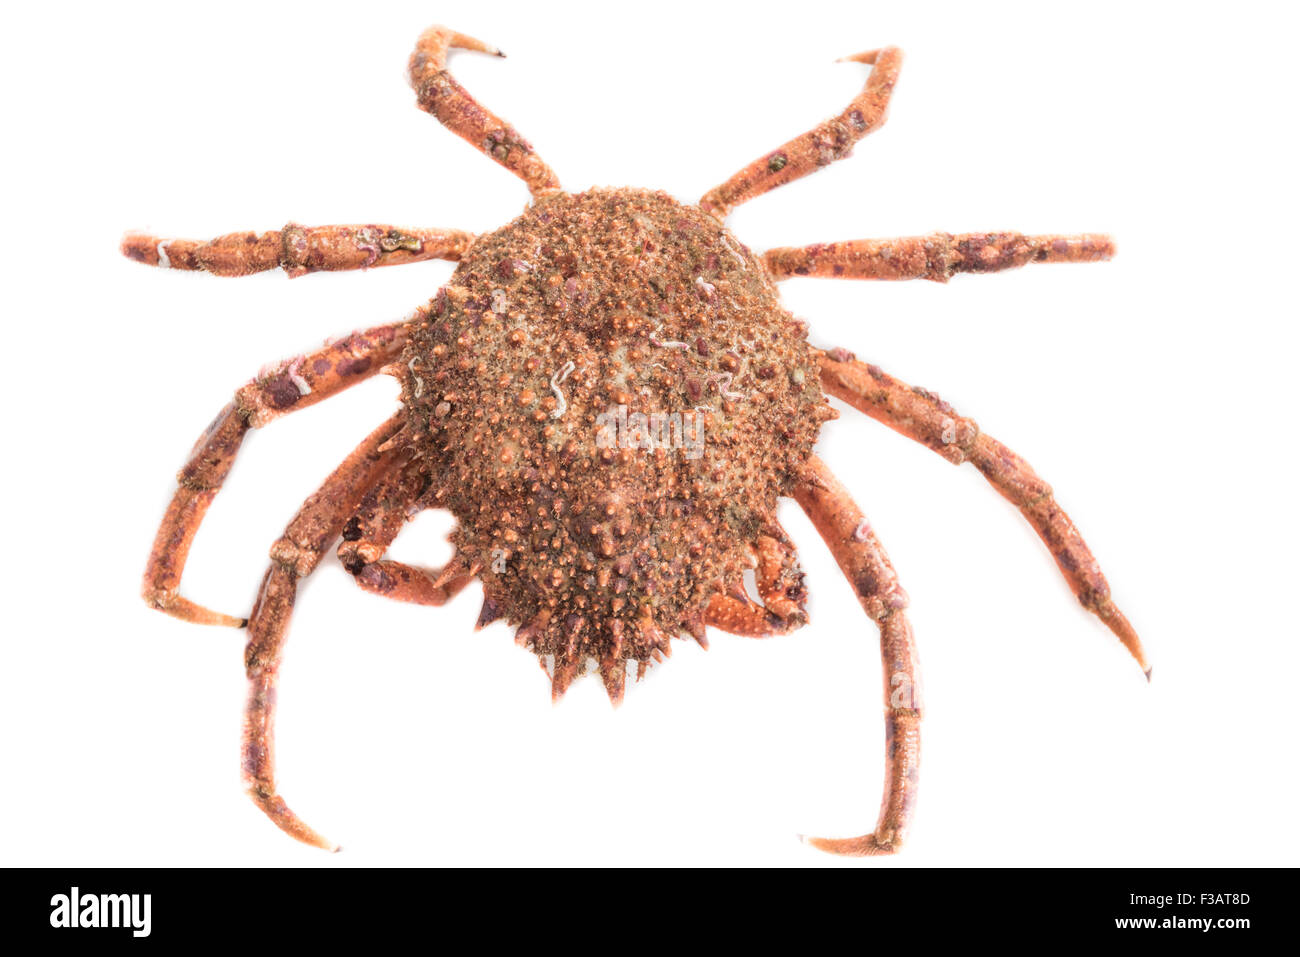 Isolated red maja squinado spider crab on a white background Stock Photo